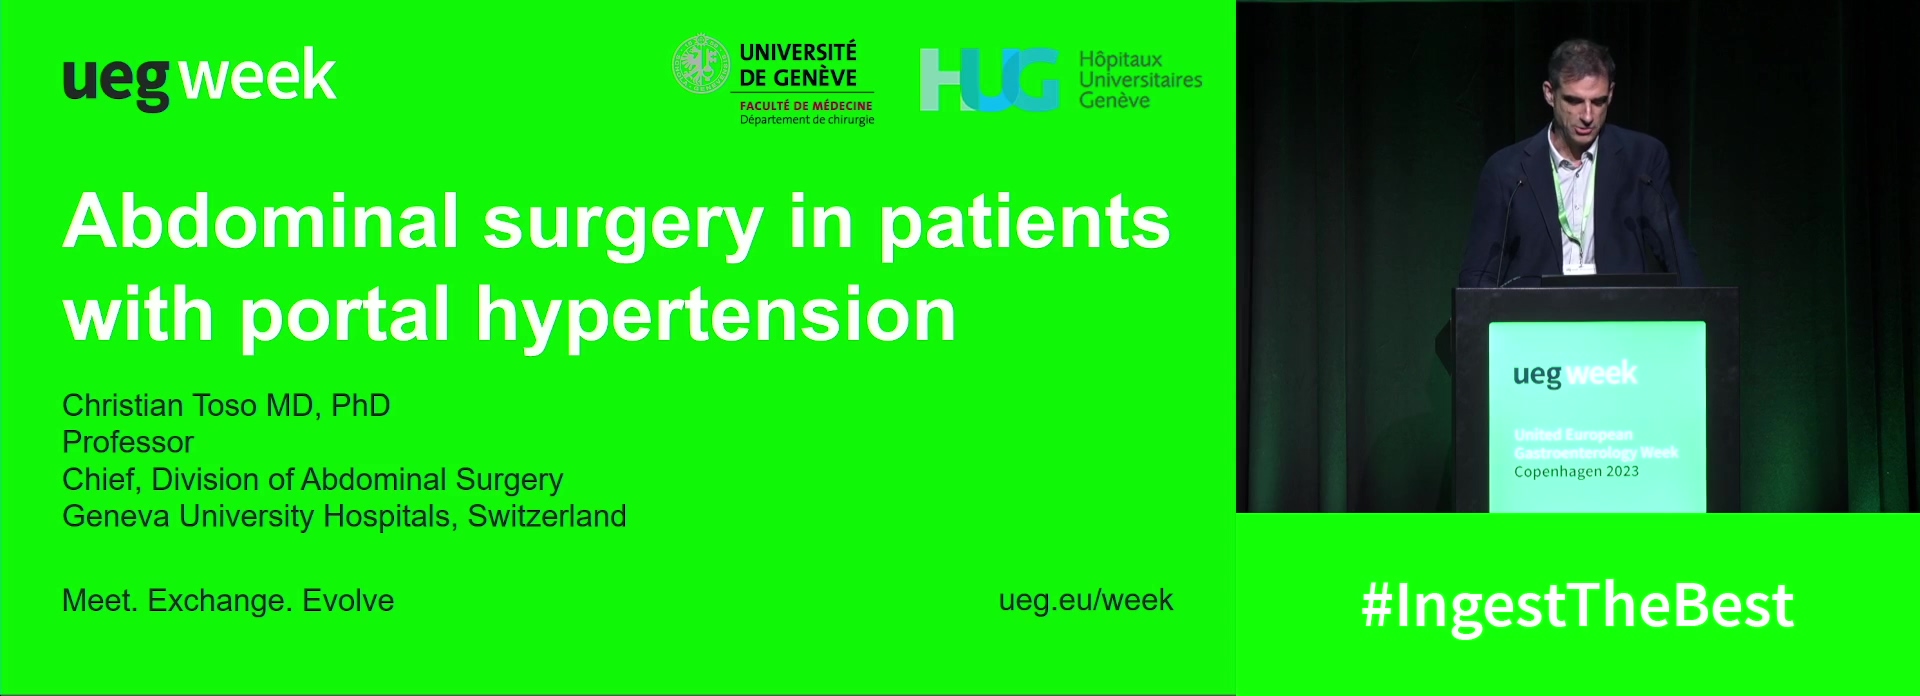 Abdominal surgery in patients with portal hypertension